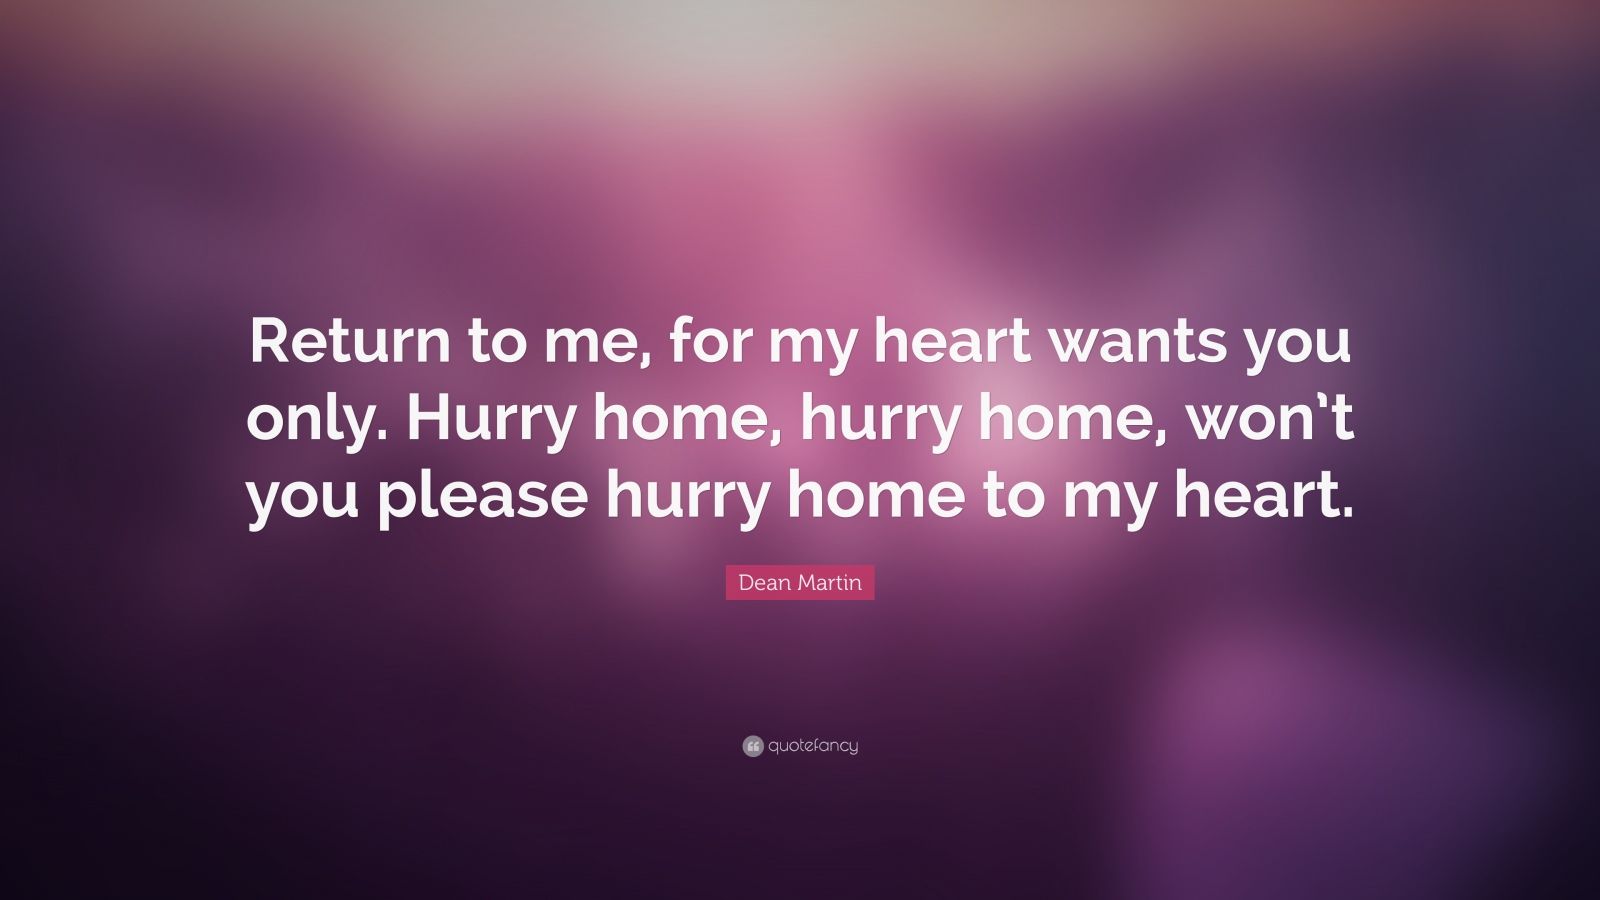 Dean Martin Quote: “Return to me, for my heart wants you only. Hurry home, hurry home, won’t you please hurry home to my heart.”